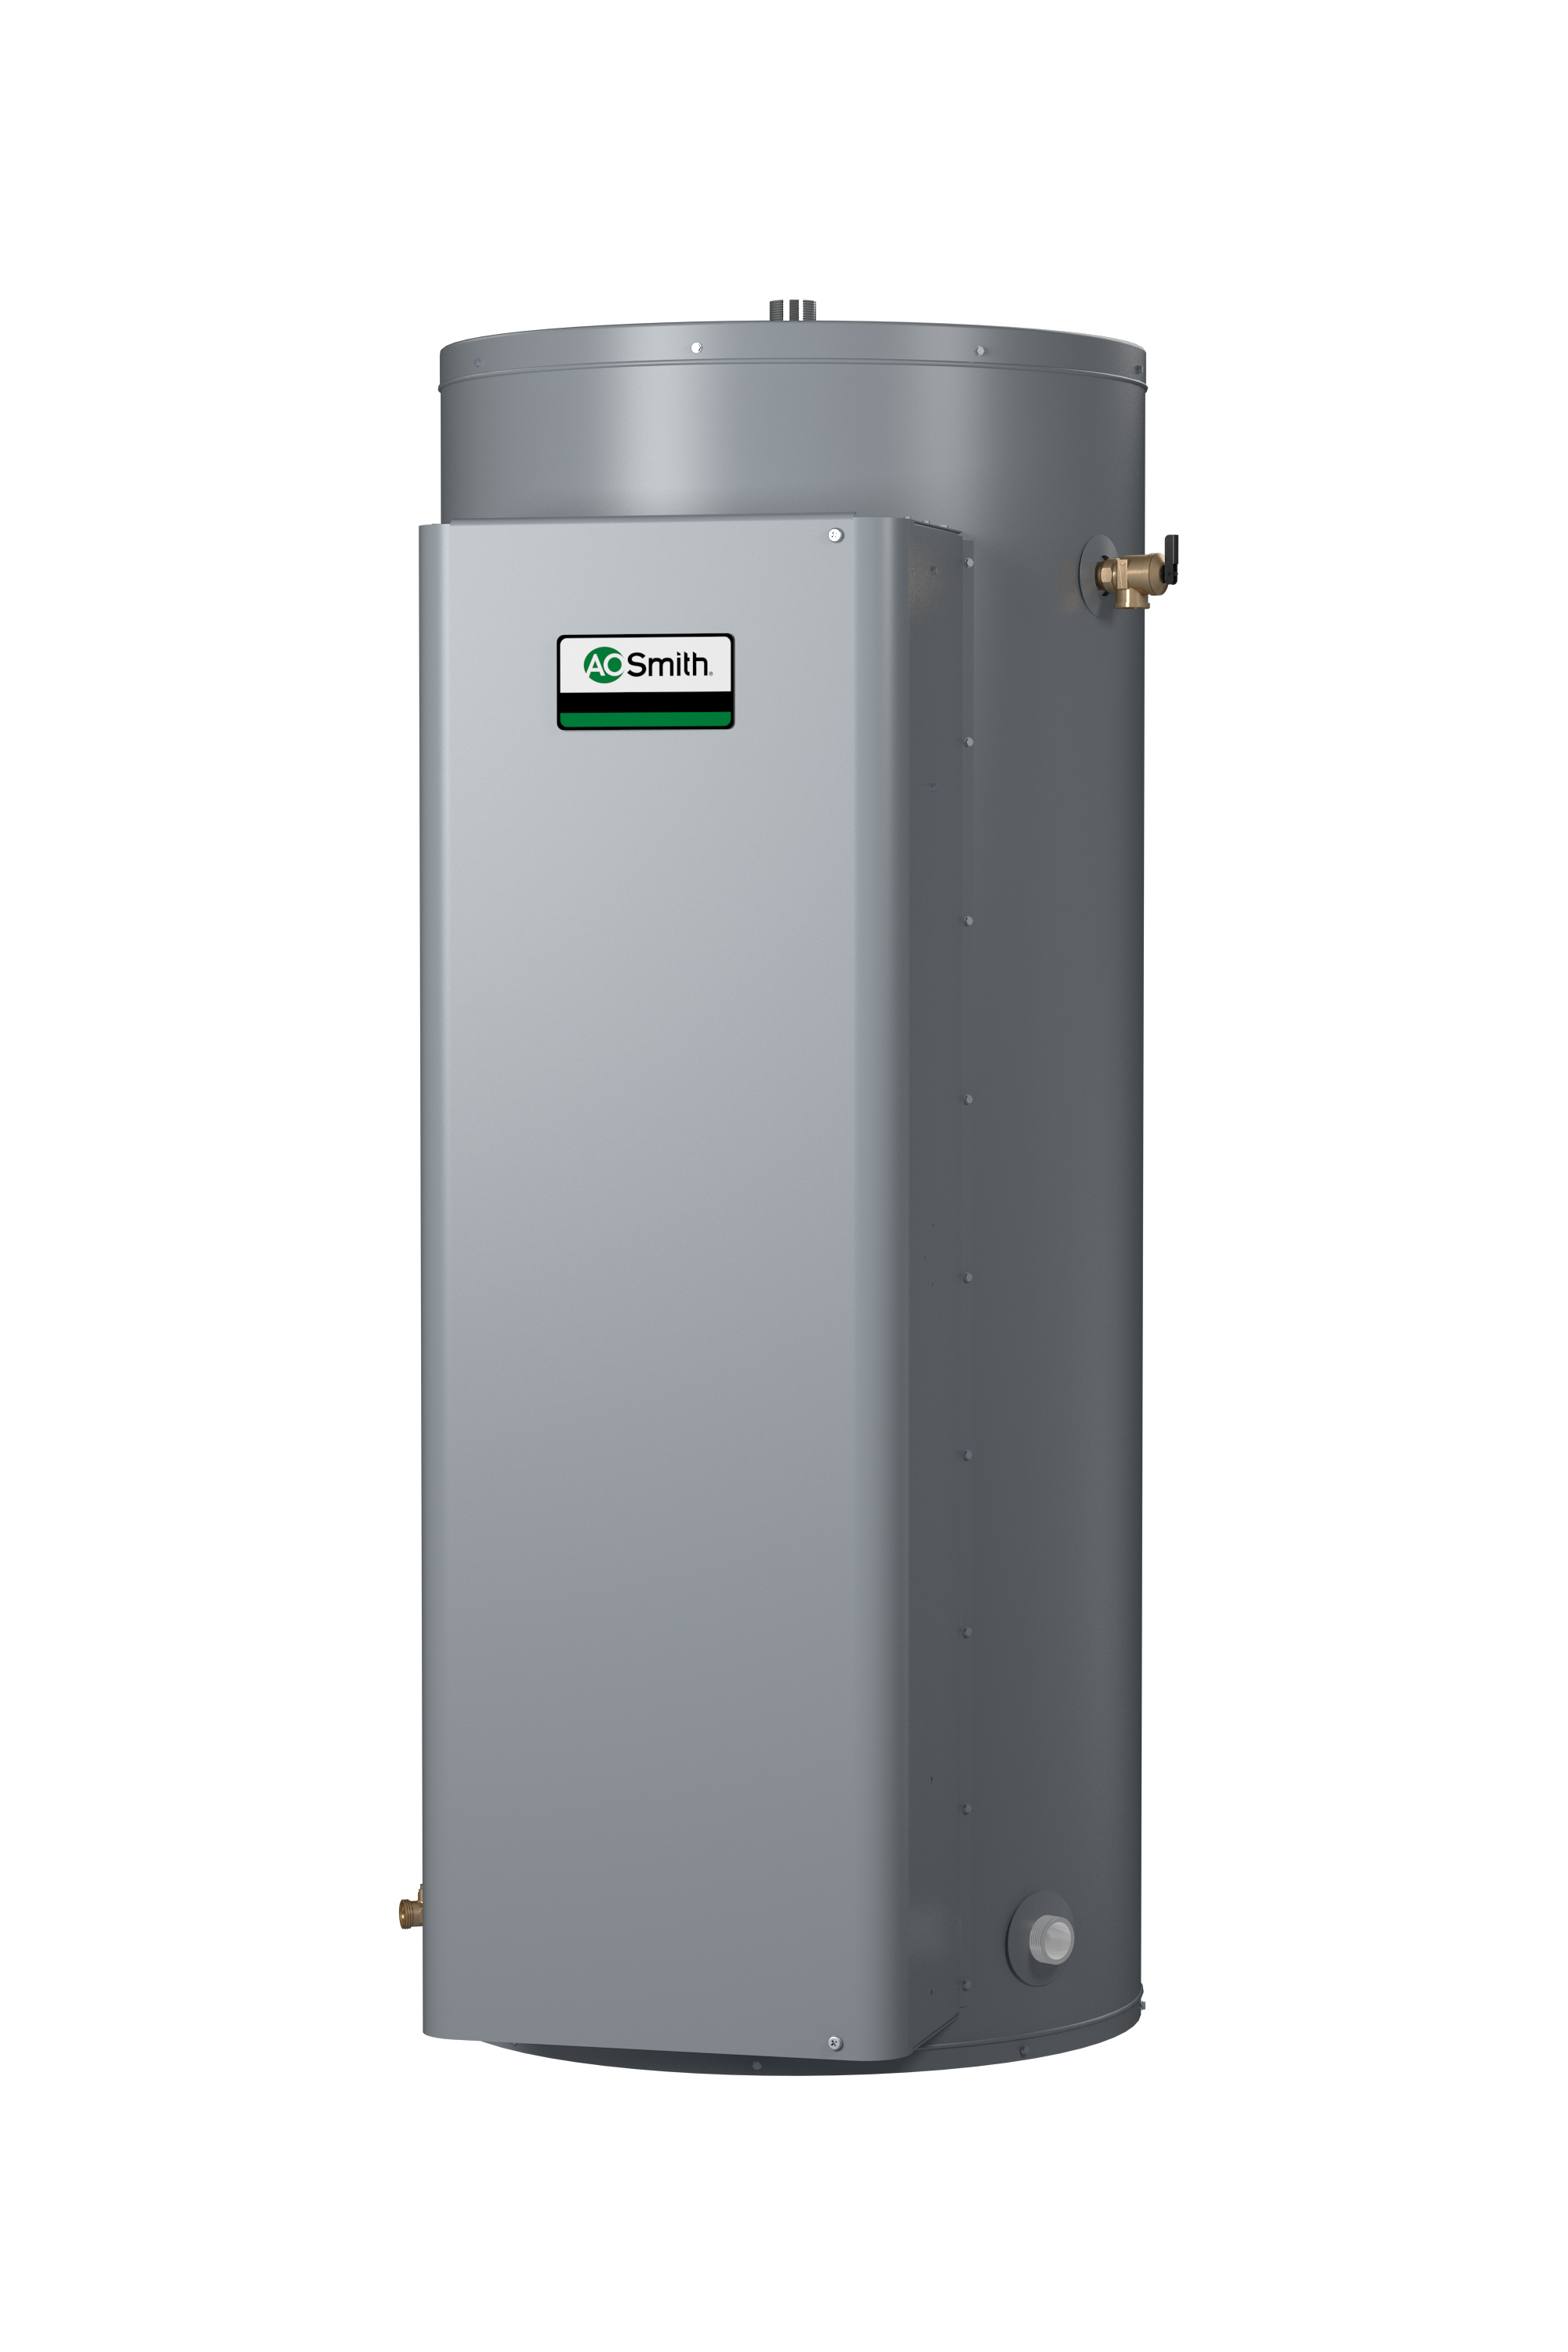 AO SMITH DRE-120-18: 119 GALLON, 18.0KW, 208 VOLT, 50 AMPS, 3 PHASE, 6 ELEMENT, COMMERCIAL ELECTRIC WATER HEATER, GOLD SERIES